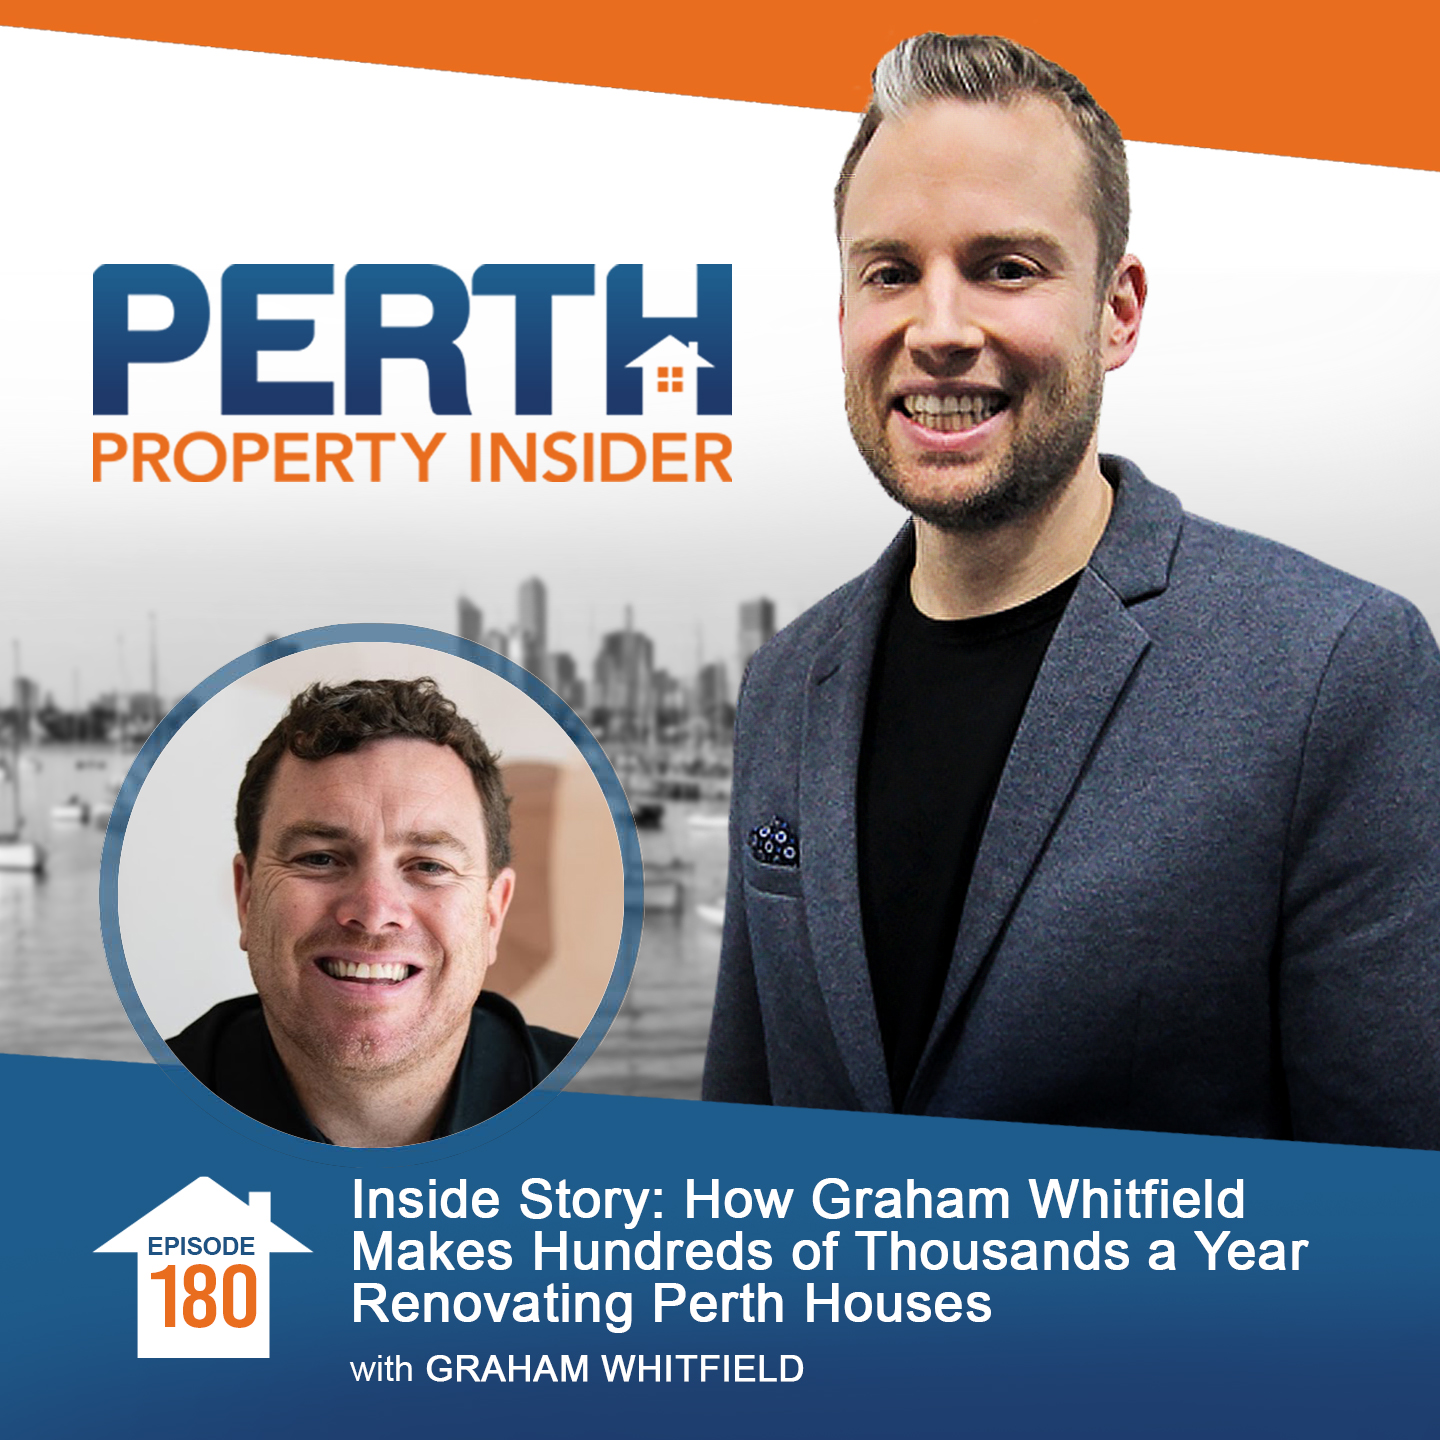 Inside Story: How Graham Whitfield Makes Hundreds of Thousands a Year Renovating & Flipping Perth Houses